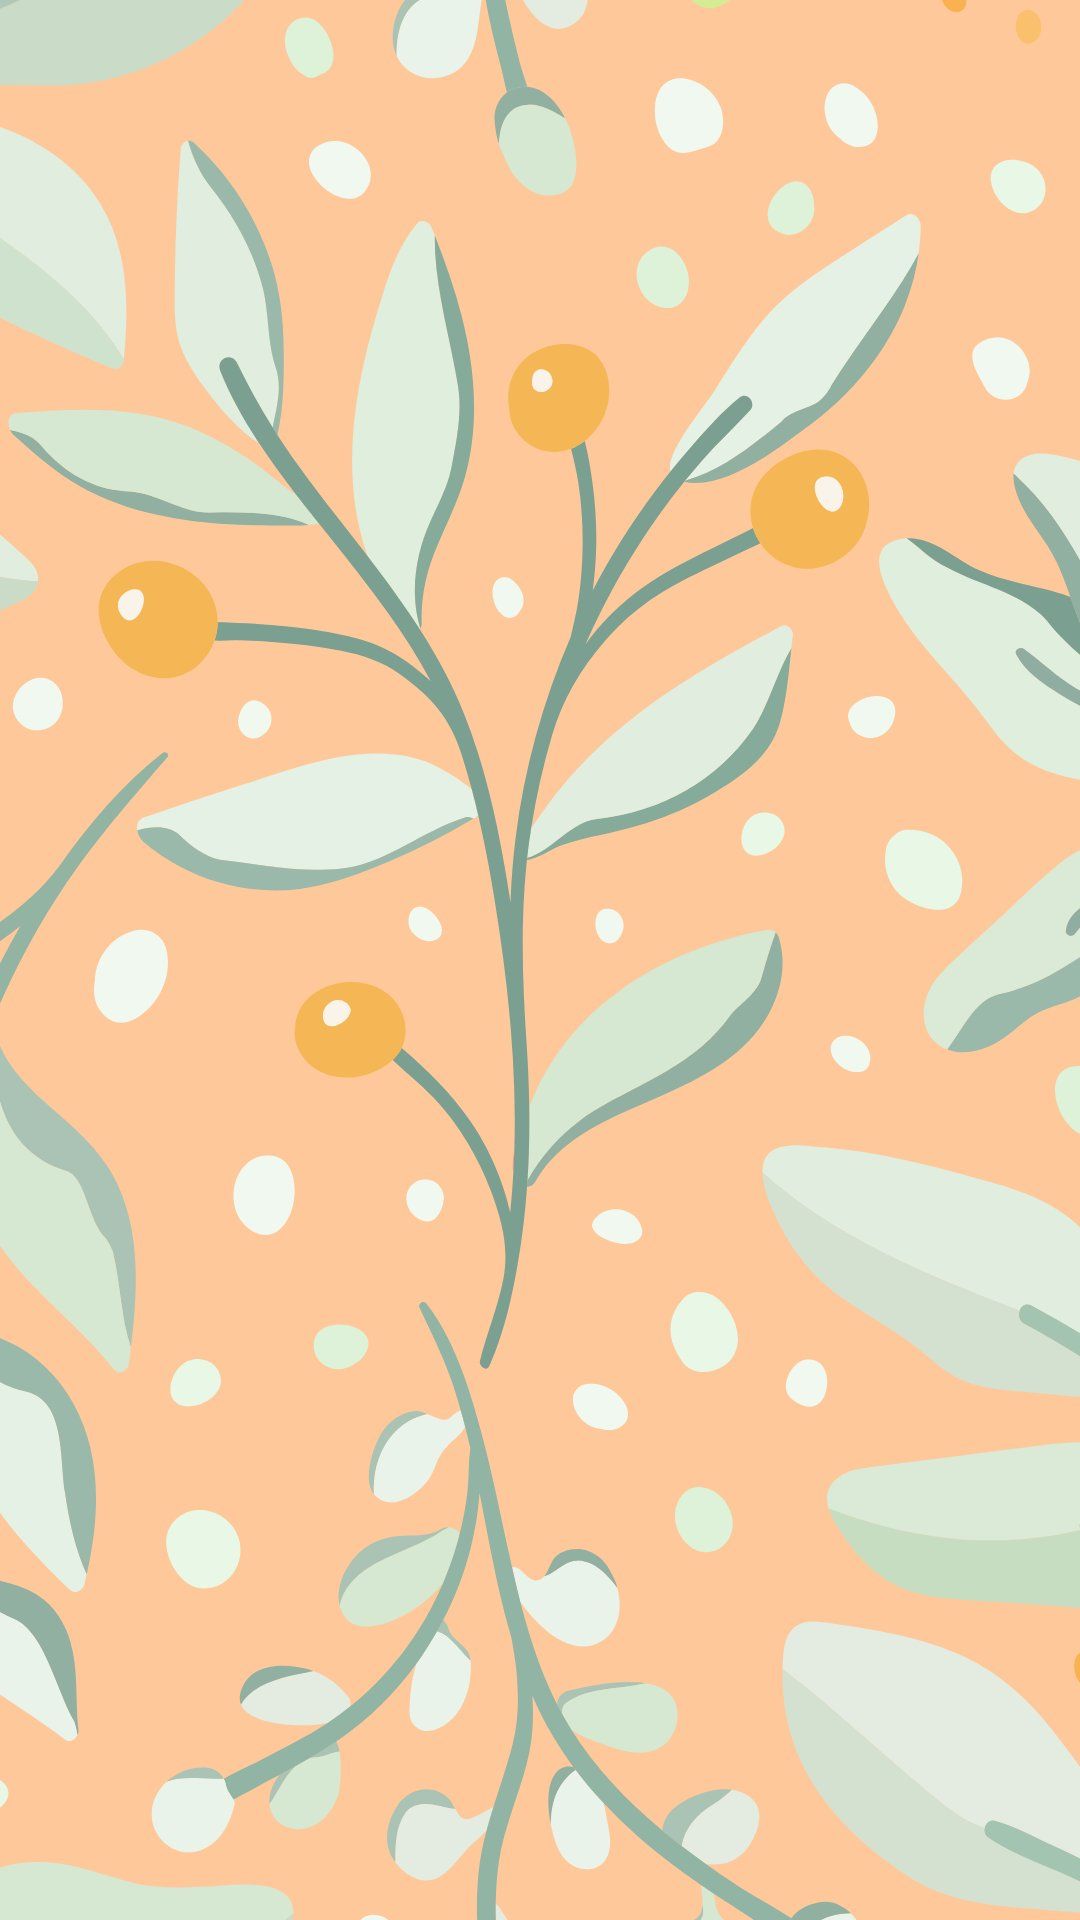 A phone wallpaper with a pattern of leaves and berries in green and white on a peach background - Cute fall